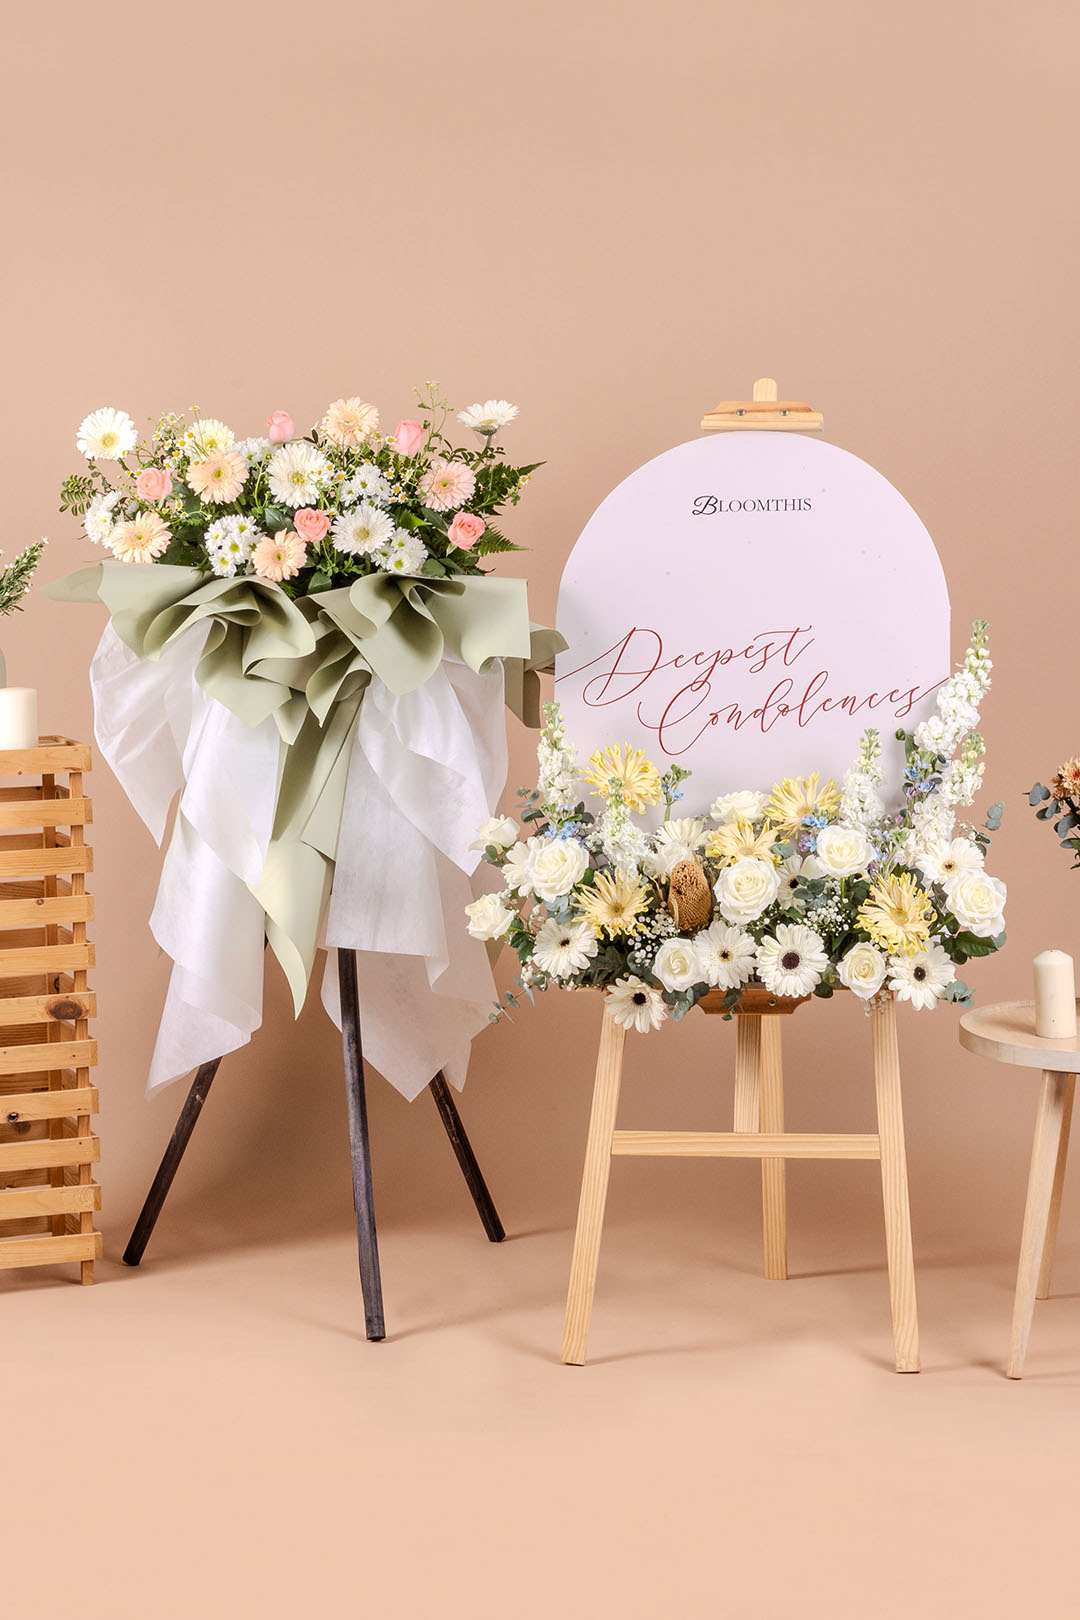 Tranquil Condolence & Funeral Flower Stand